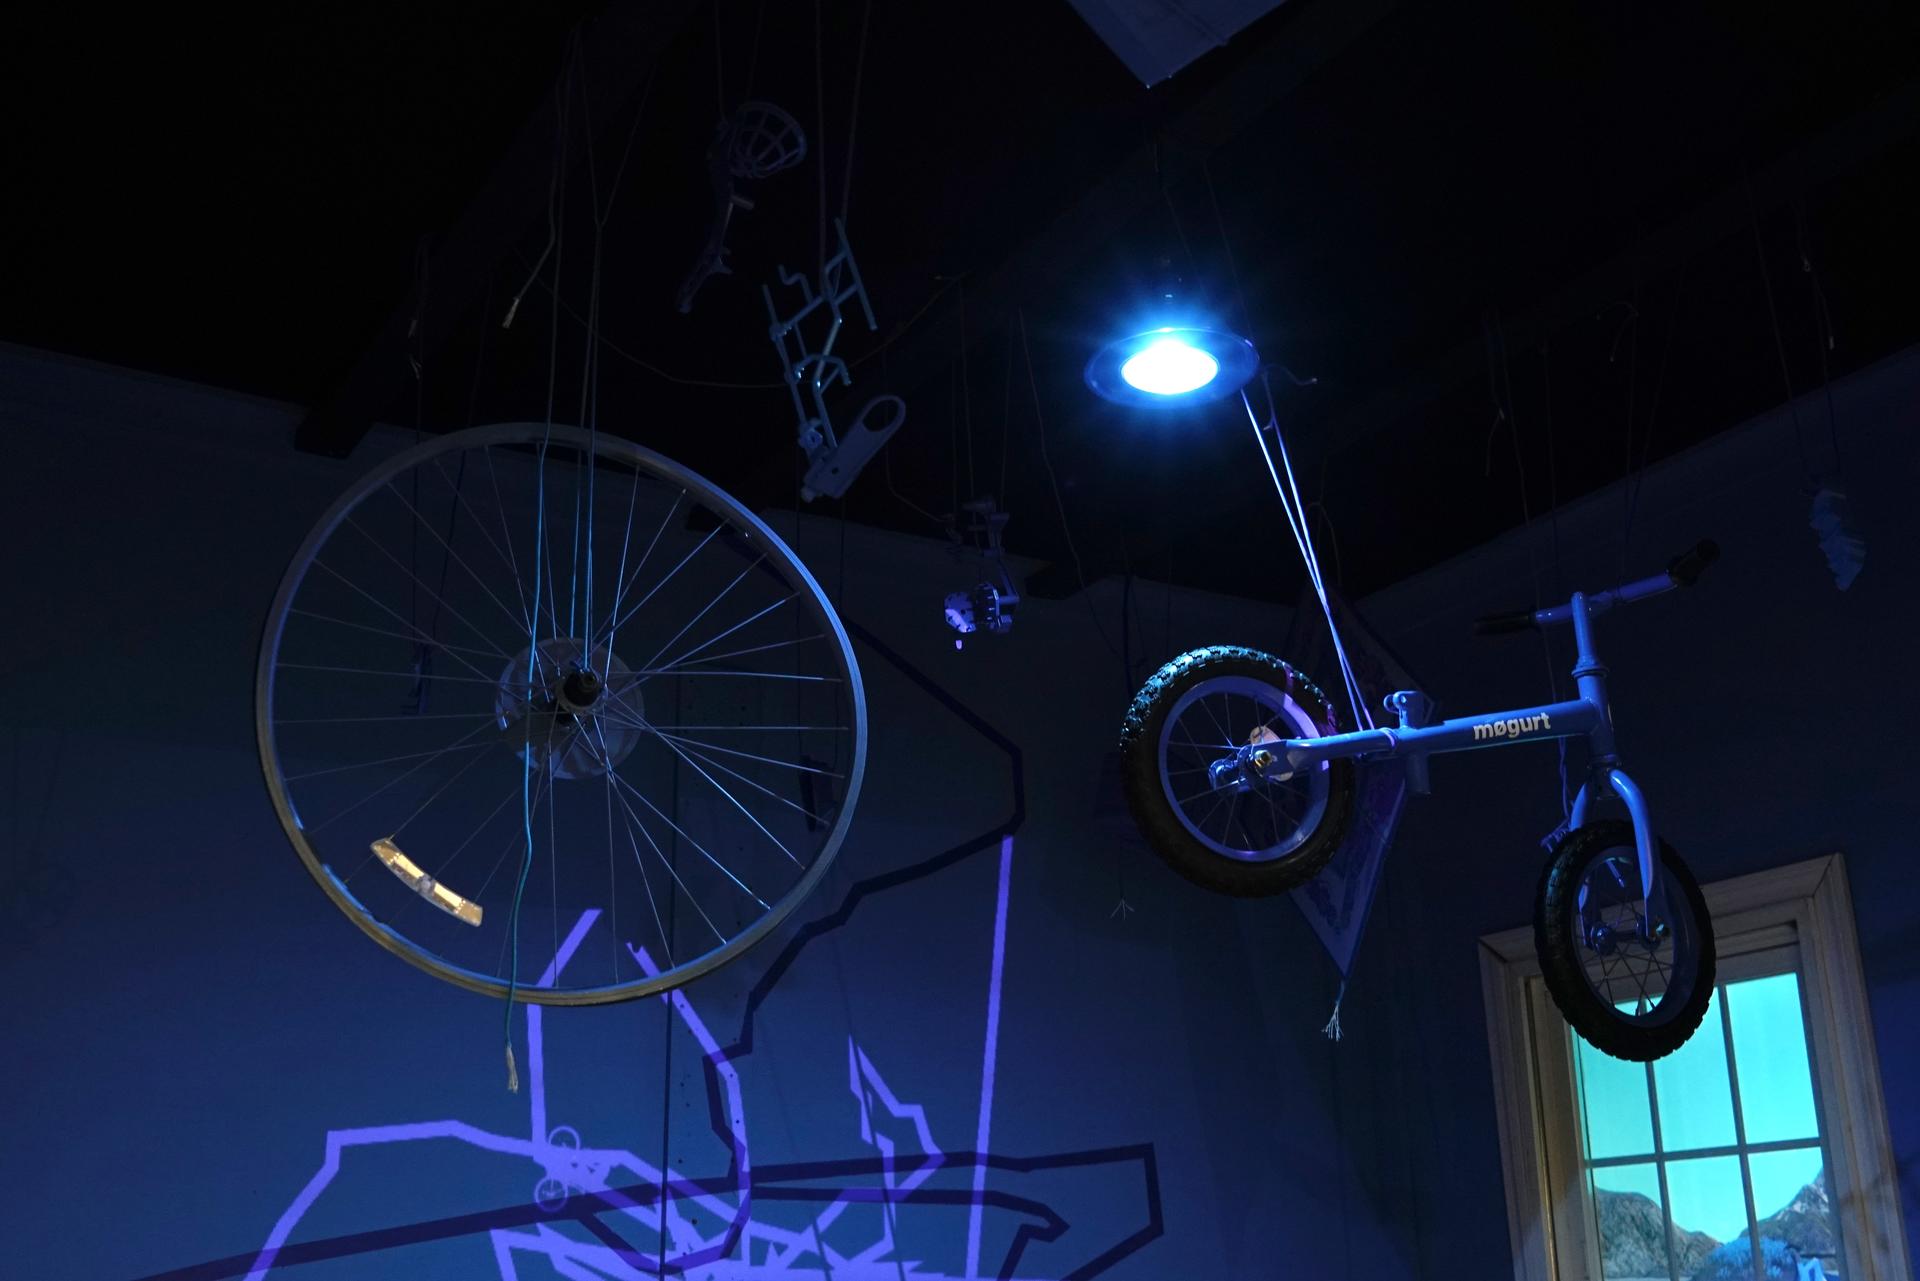 Installation materials suspended from the ceiling: Mouse trap board game pieces, kid's bike, busted bike wheel, paracord